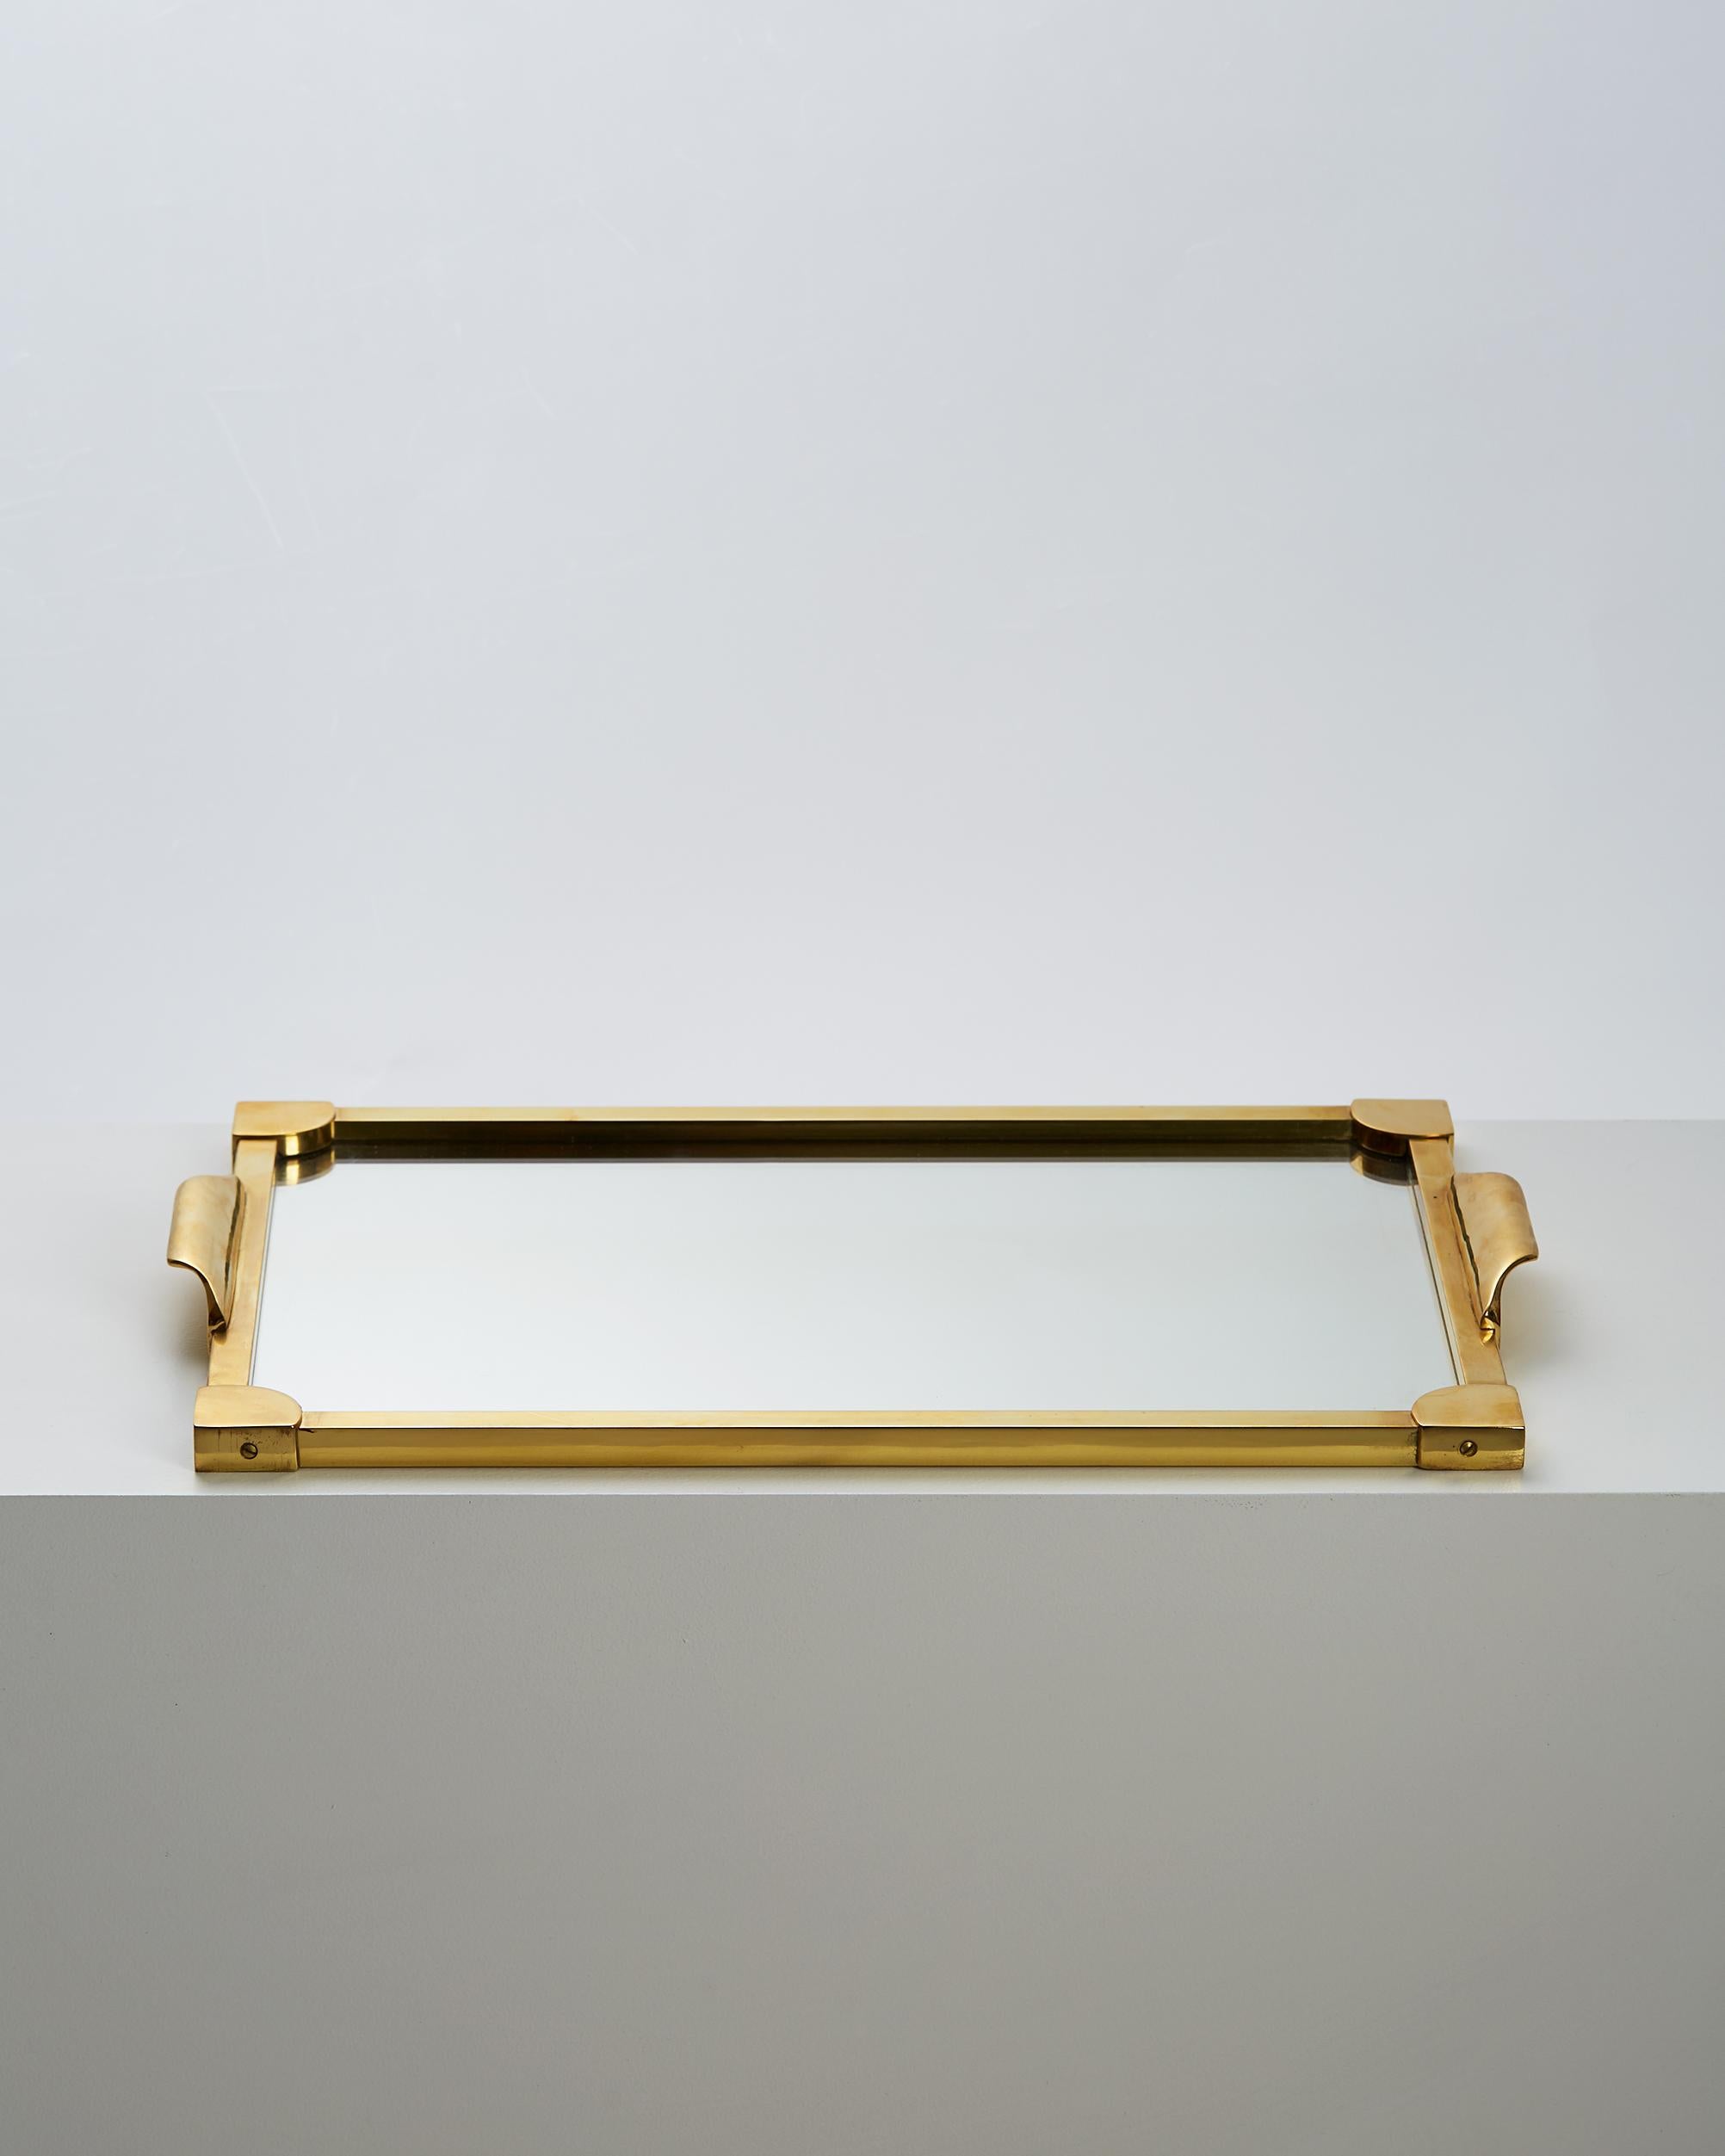 Tray, anonymous, 
Sweden, 1950s.

Brass and mirrored glass.

Measures: L 52 cm/ 1' 8 3/4''
W 33.2 cm/ 13 1/8''
H 1.5 cm/ 3/4''.